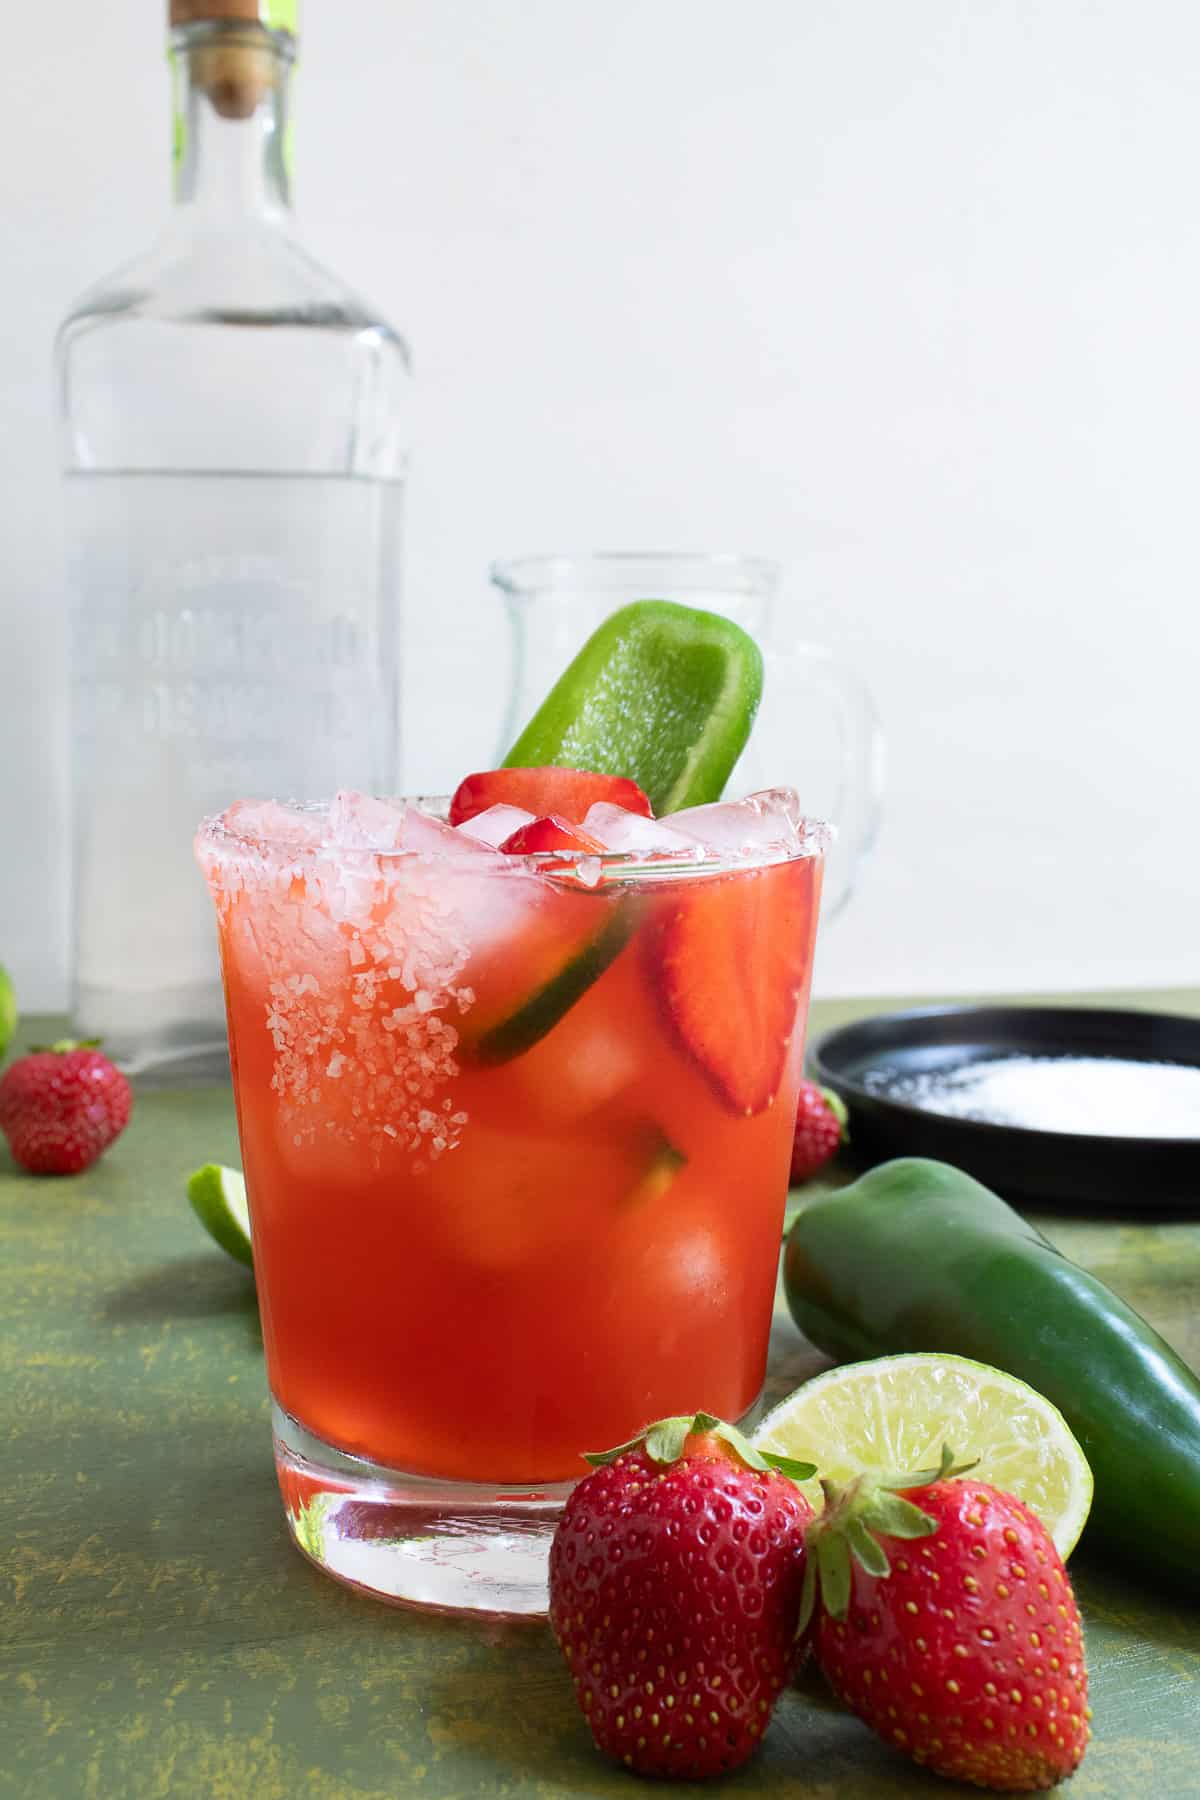 A rocks glass with a salted rim holds a red liquid and is garnished with a sliced strawberry and a slice of jalapeno. In the background sits a tall clear glass bottle containing a clear liquid.